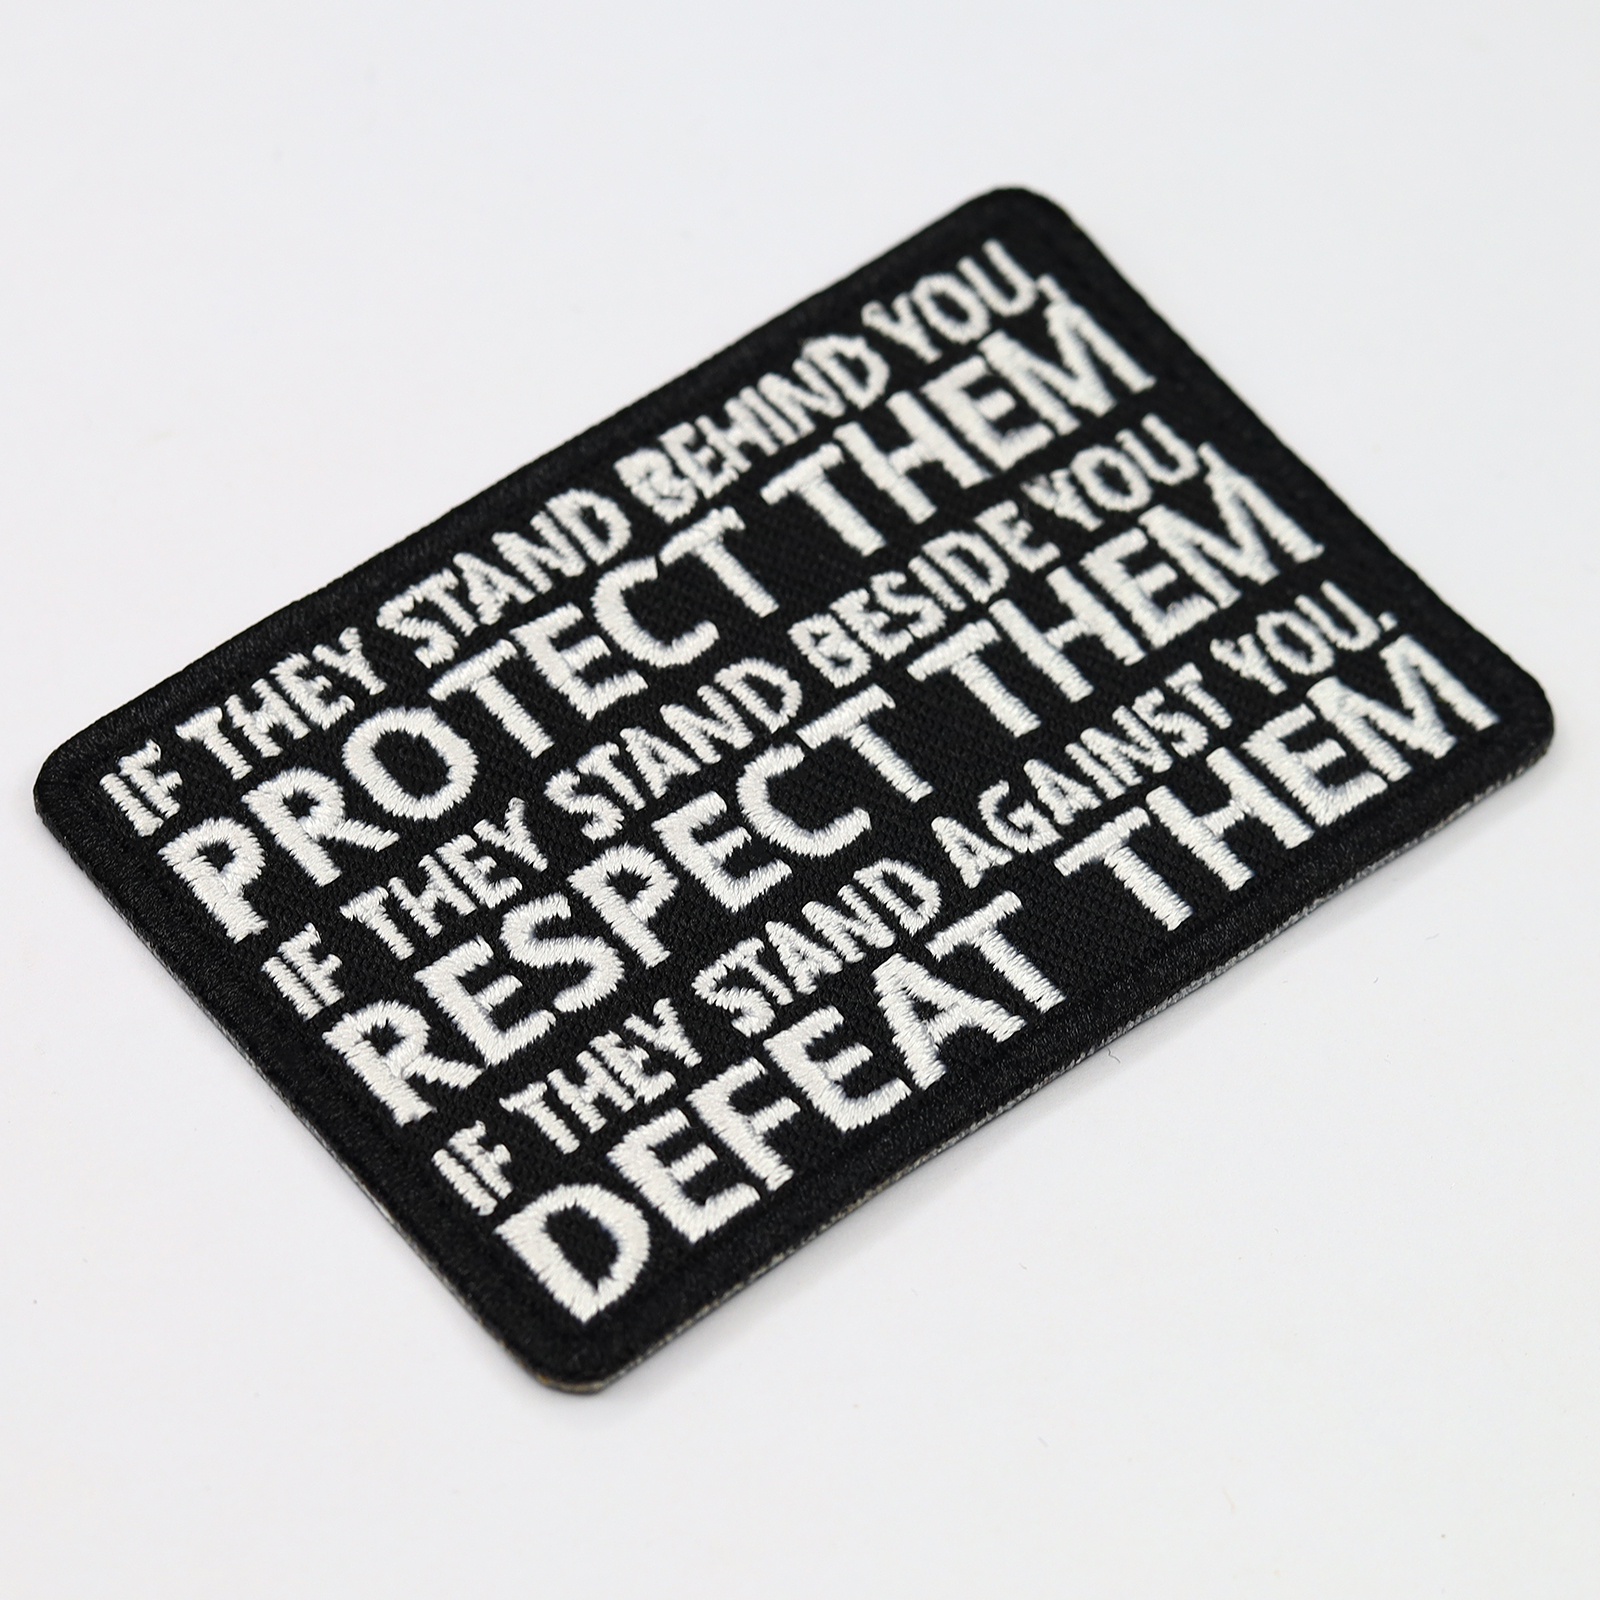 Protect them - Respect them- Defeat them - Patch